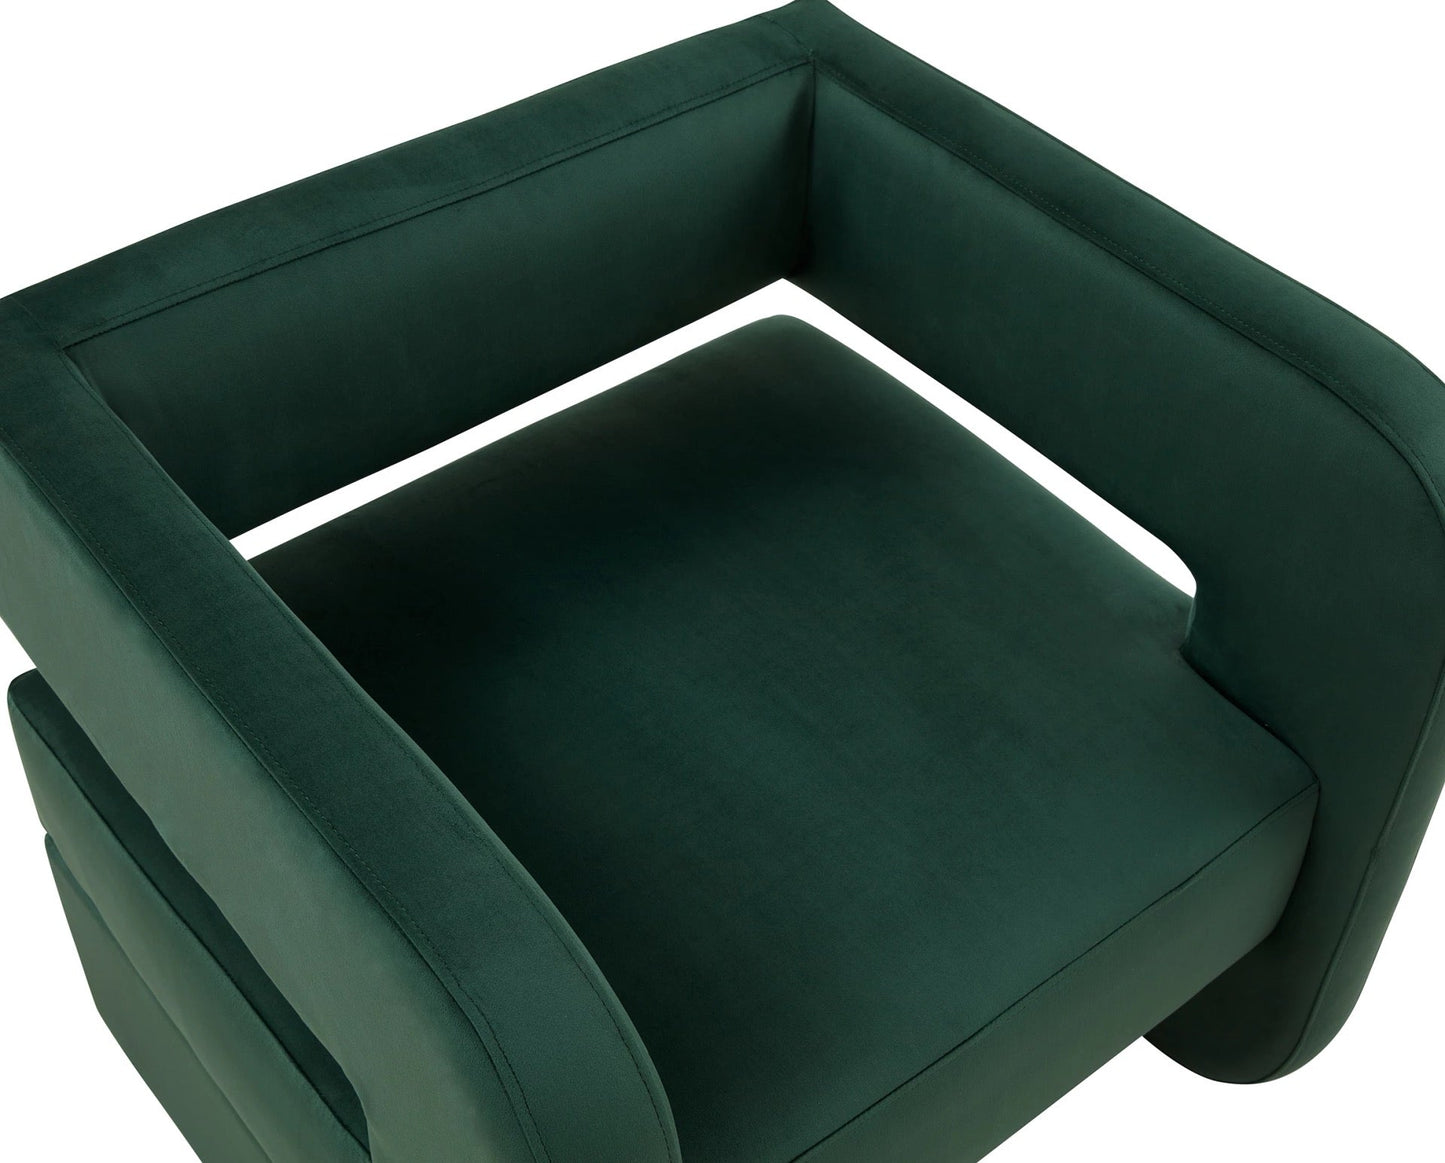 Arm Chair Green Outlet Lounge Leisure Chair Nordic Light Luxury Sessel